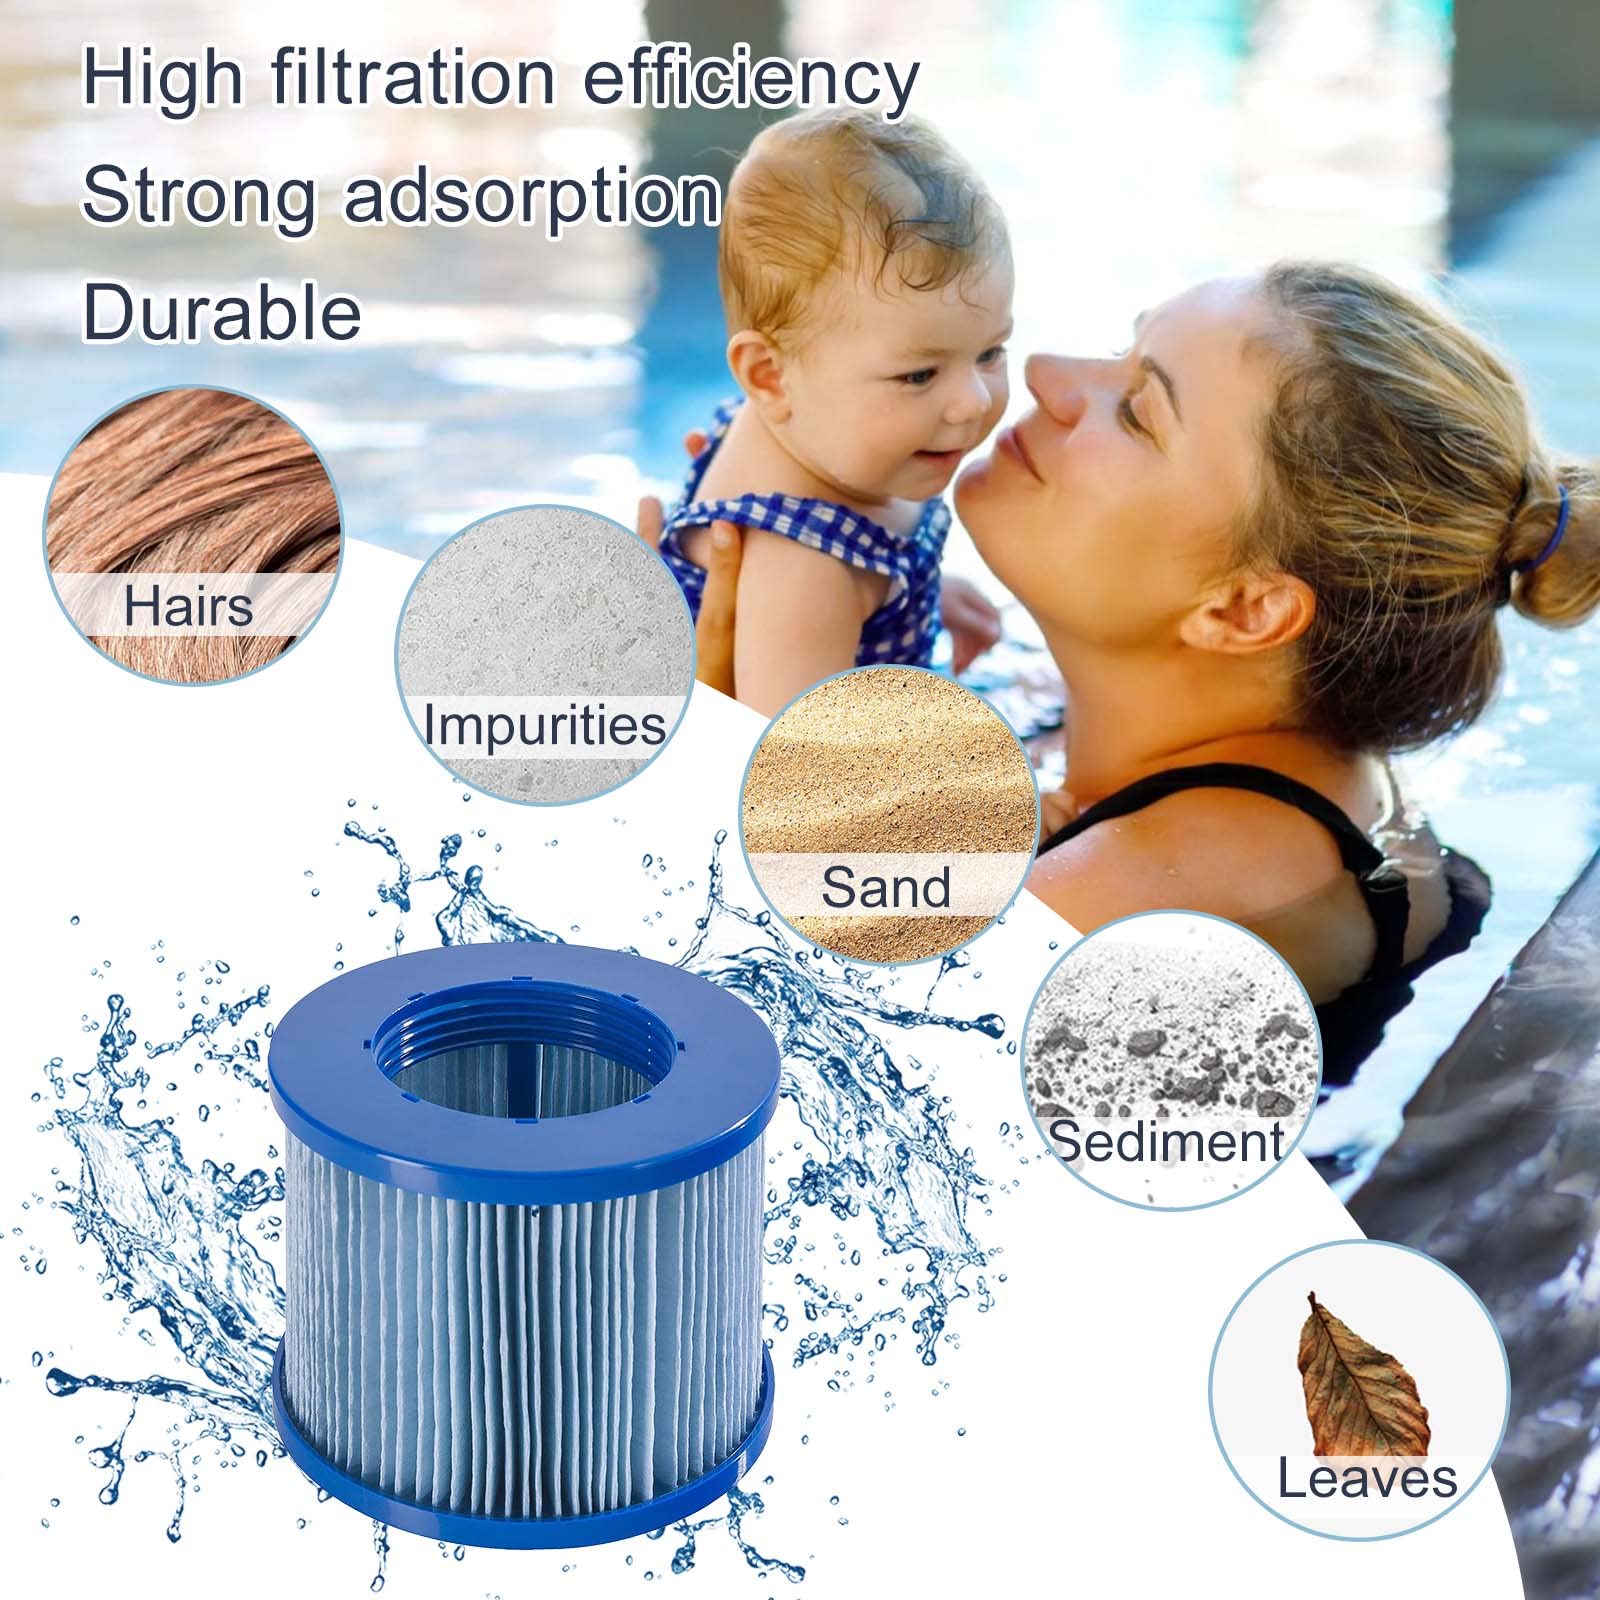 Relxtime 6 Pack Spa Filter Replacement, Pool Filters Hot Tub Filter Cartridges, Compatible With Inflatable Tubs Filtration, Blue